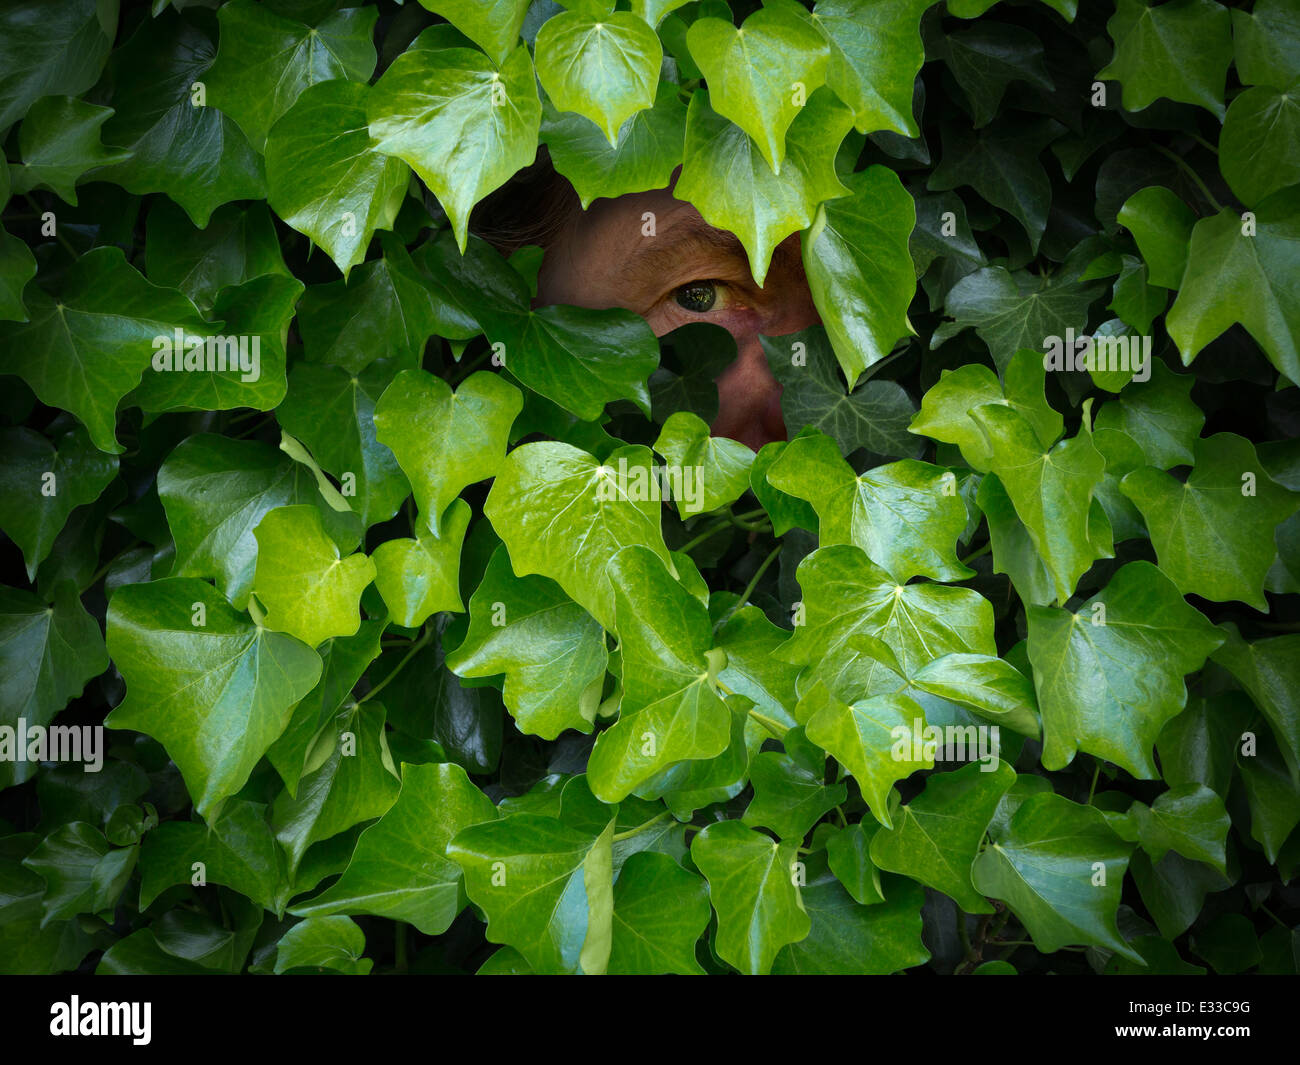 A male hidden in shadow peeping through a gap in a hedge of dark green ivy Stock Photo